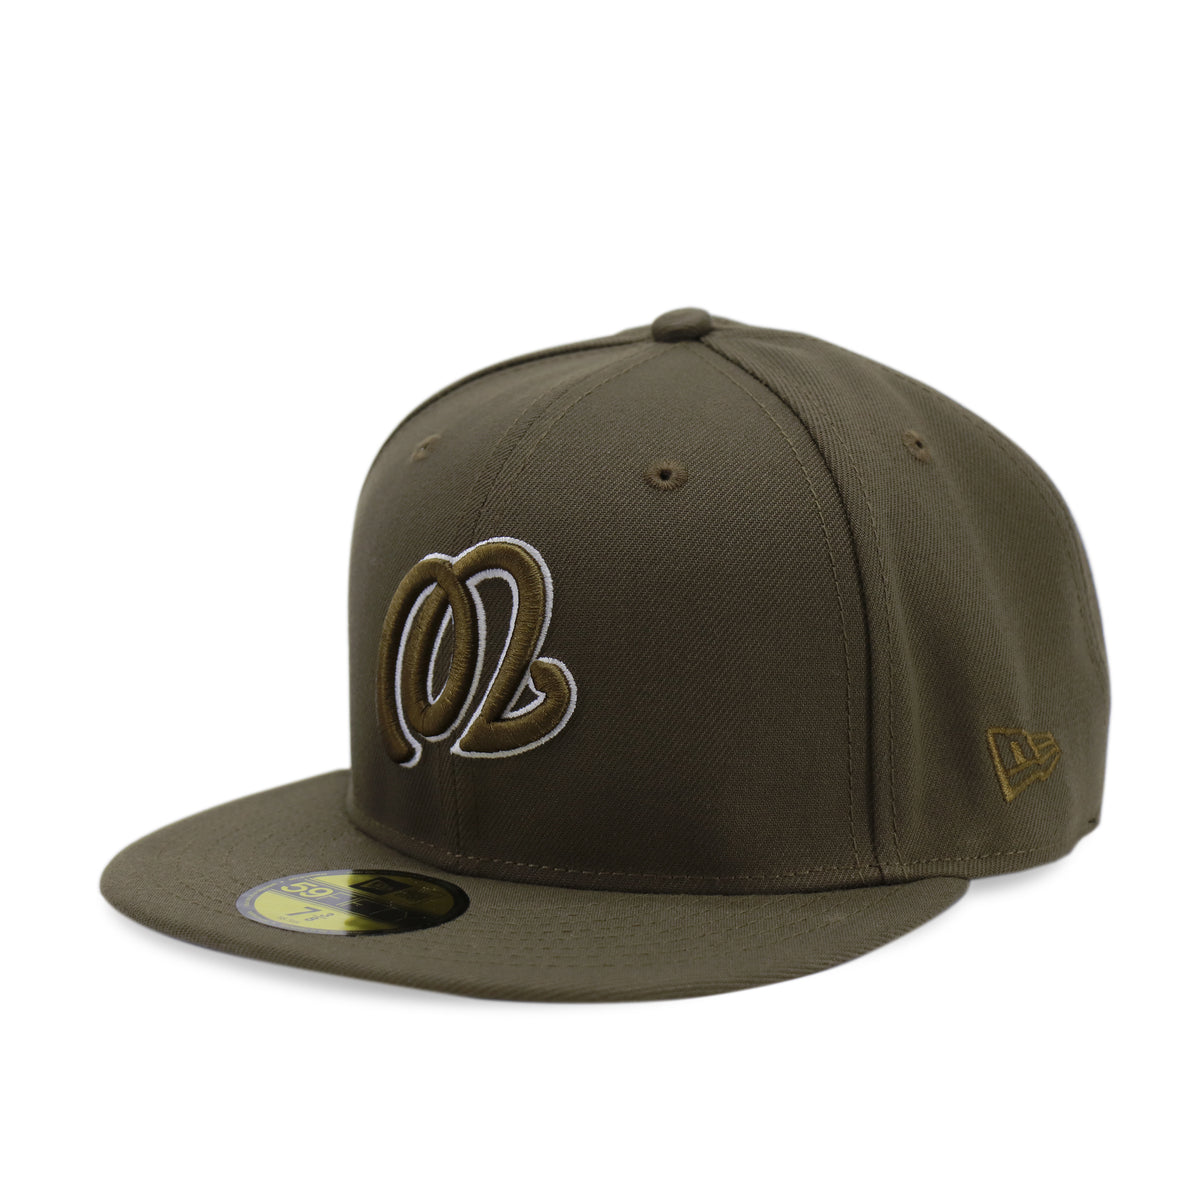 THE CAP 5950 WASNAT MLB Upside Down